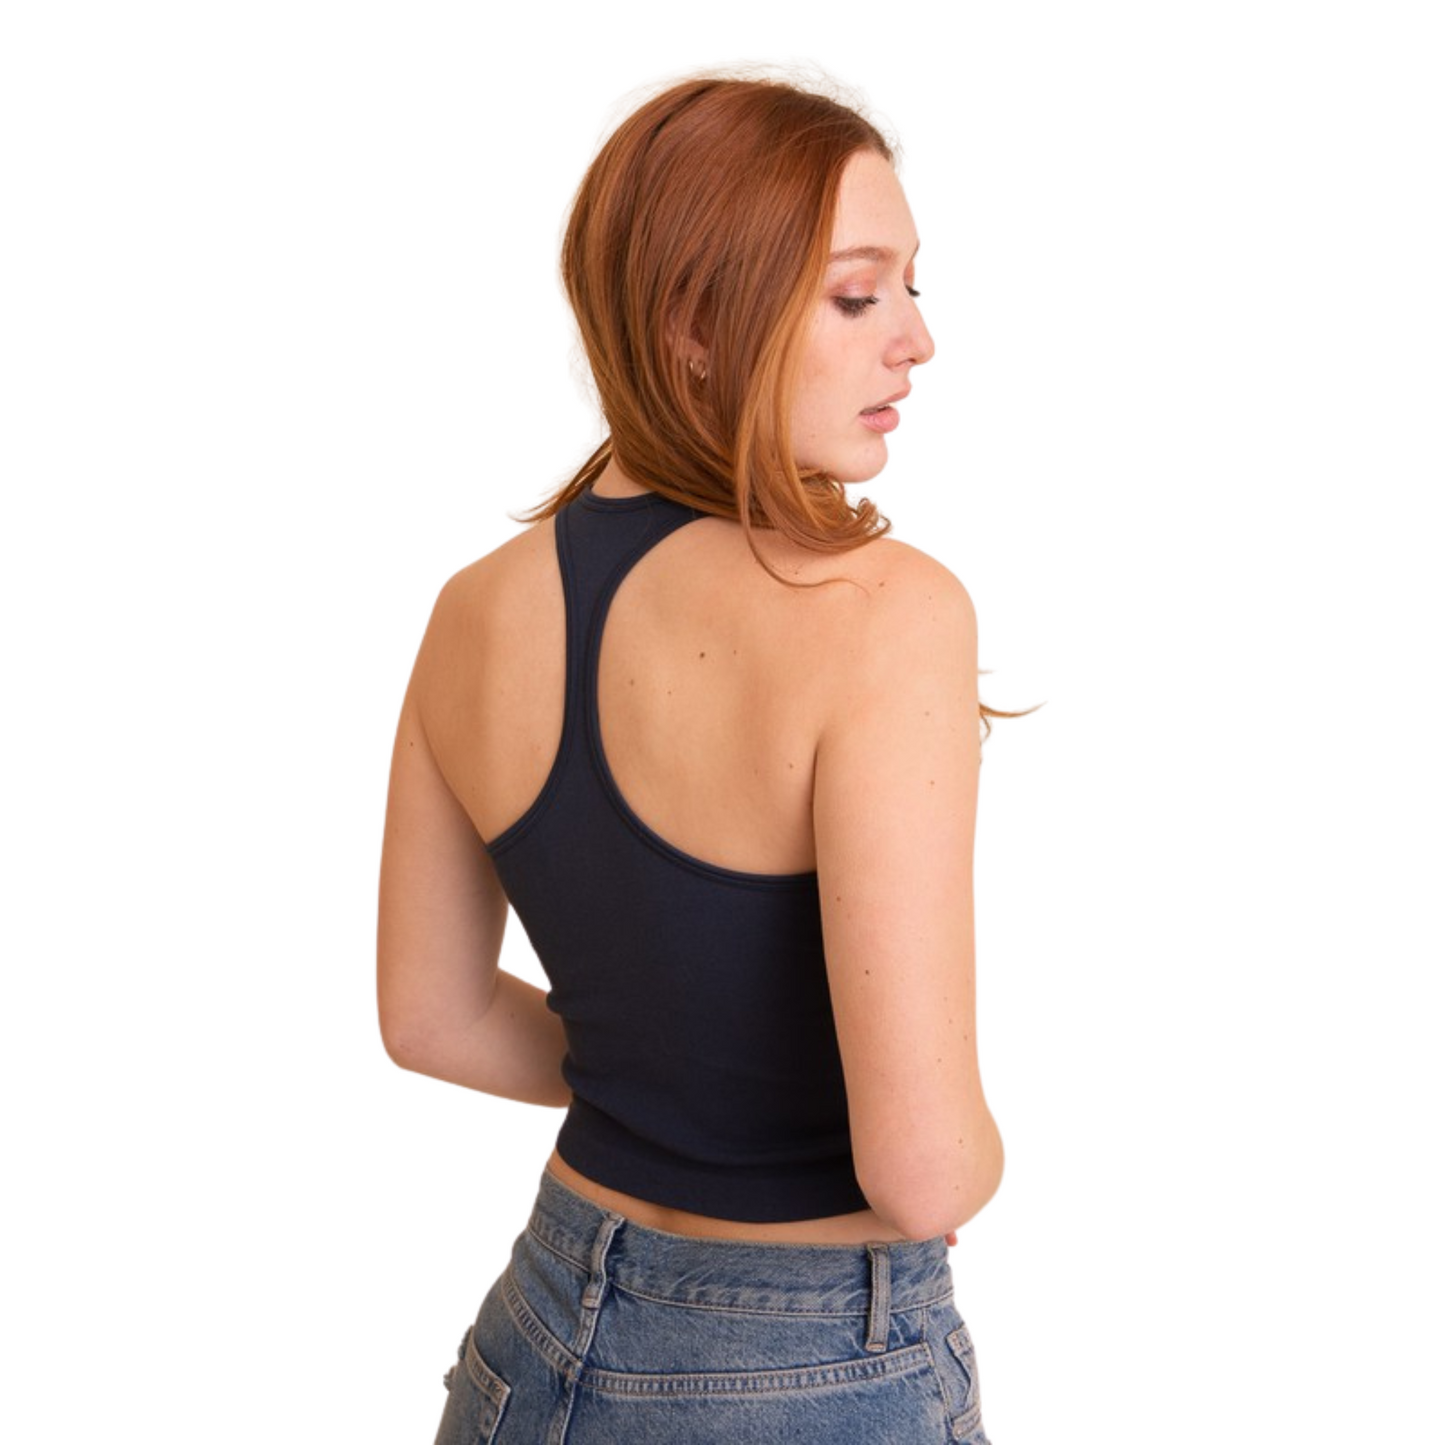 This High Neck Racerback Brami Top is the ideal wardrobe staple. Available in baby blue, grey blue, and black, it is the perfect top for any occasion. With its timeless style, you can be sure that you'll look and feel great when you wear it.